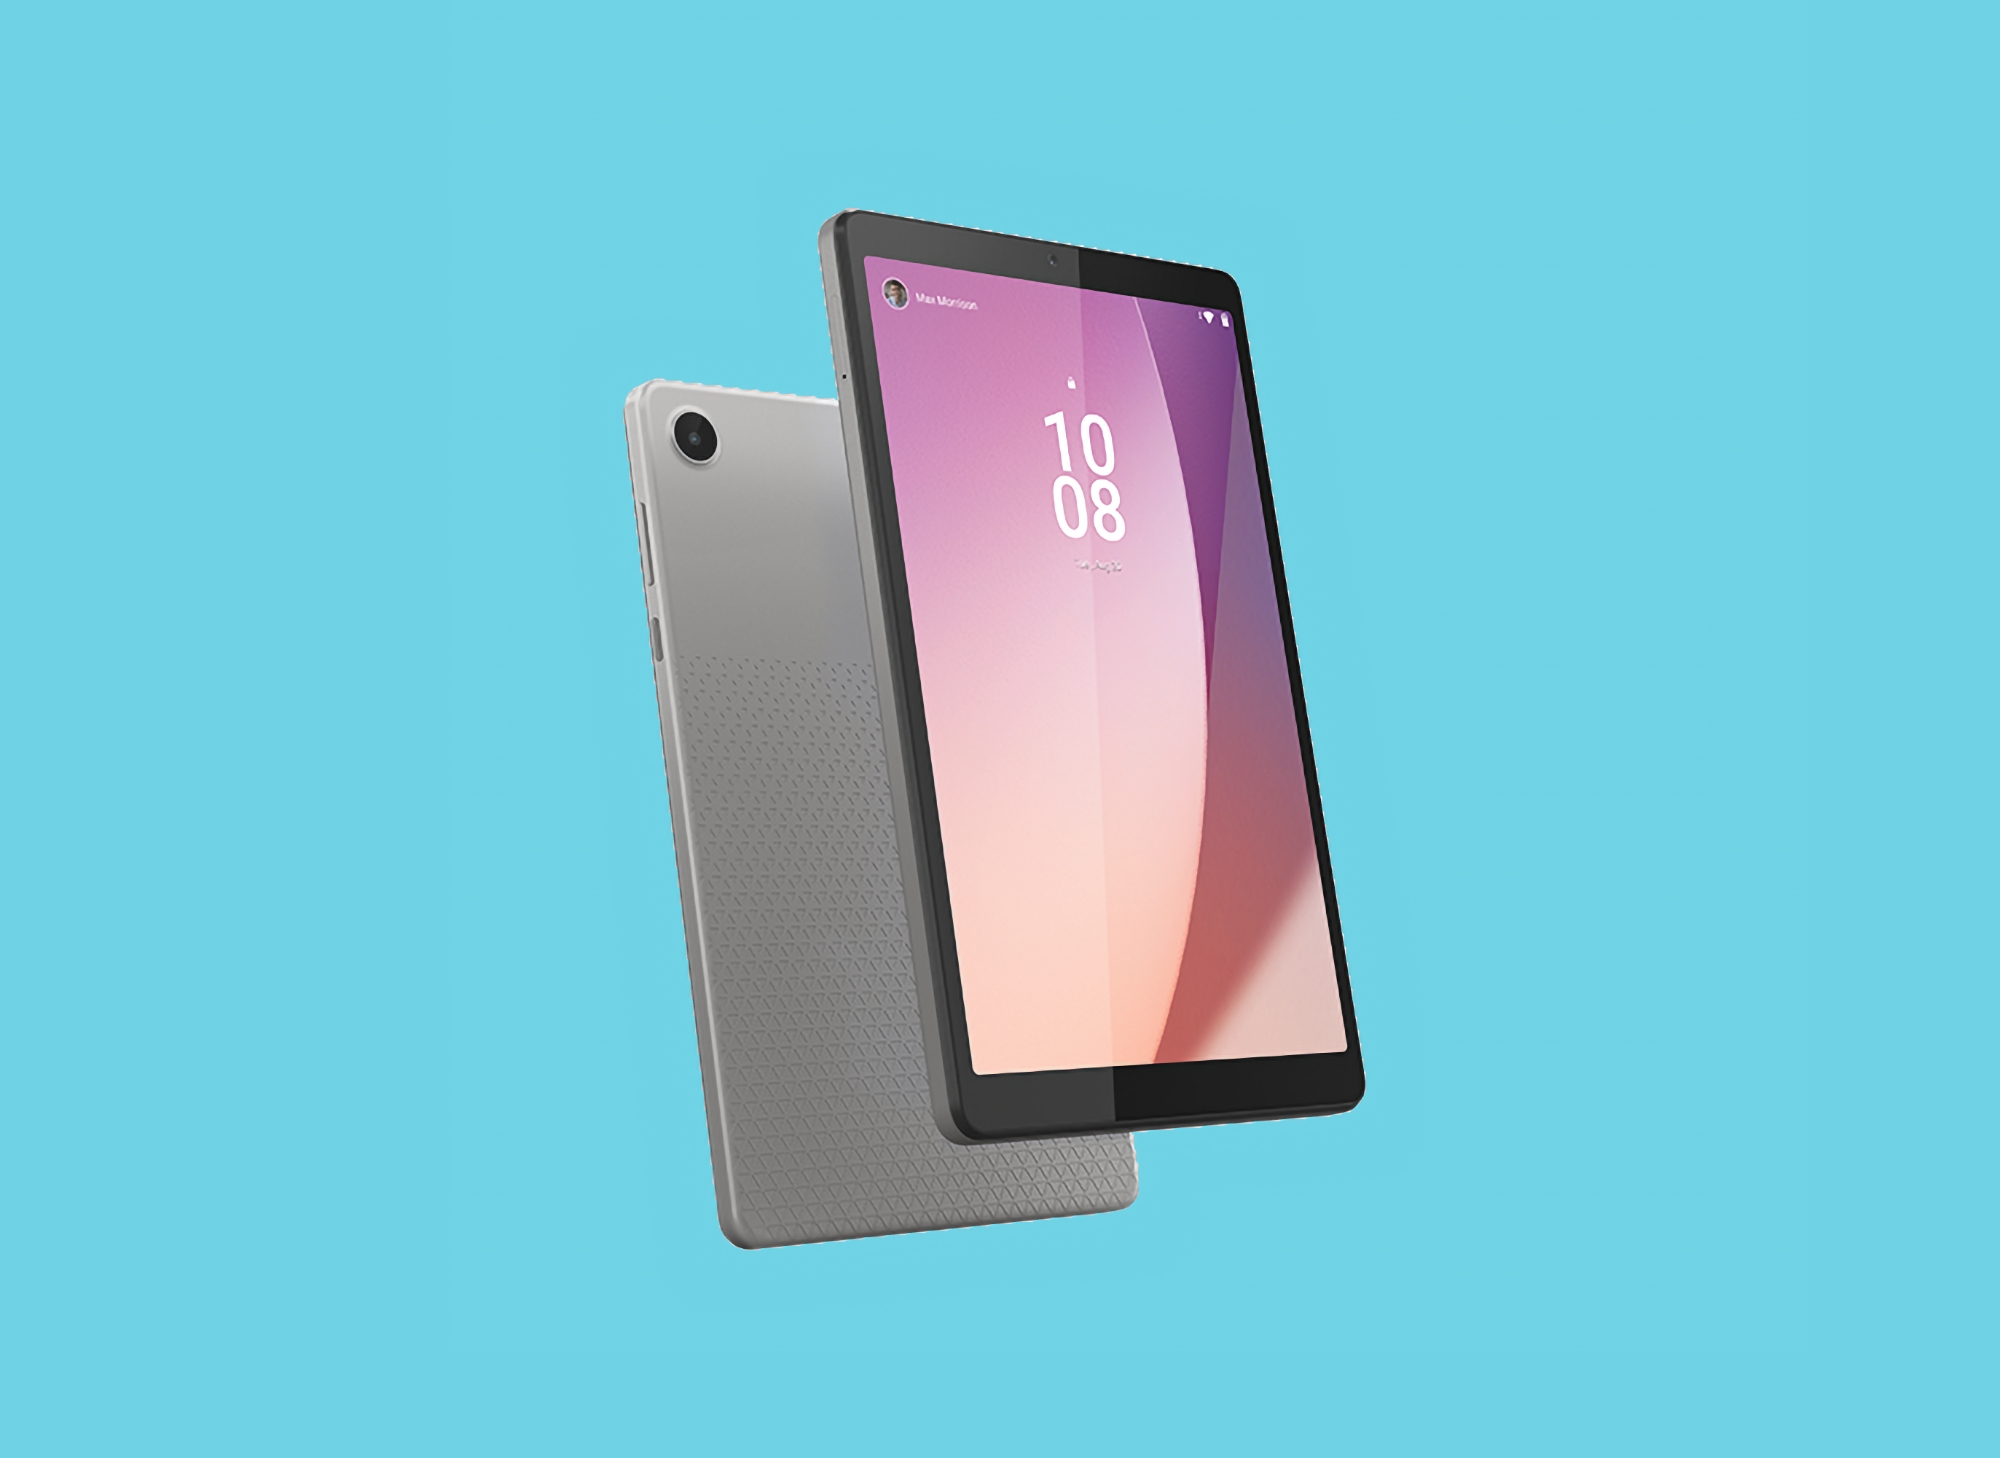 Lenovo Tab M8 (4th Gen) on Amazon: a tablet with an 8-inch screen and a 5100mAh battery for $78 ($31 off)